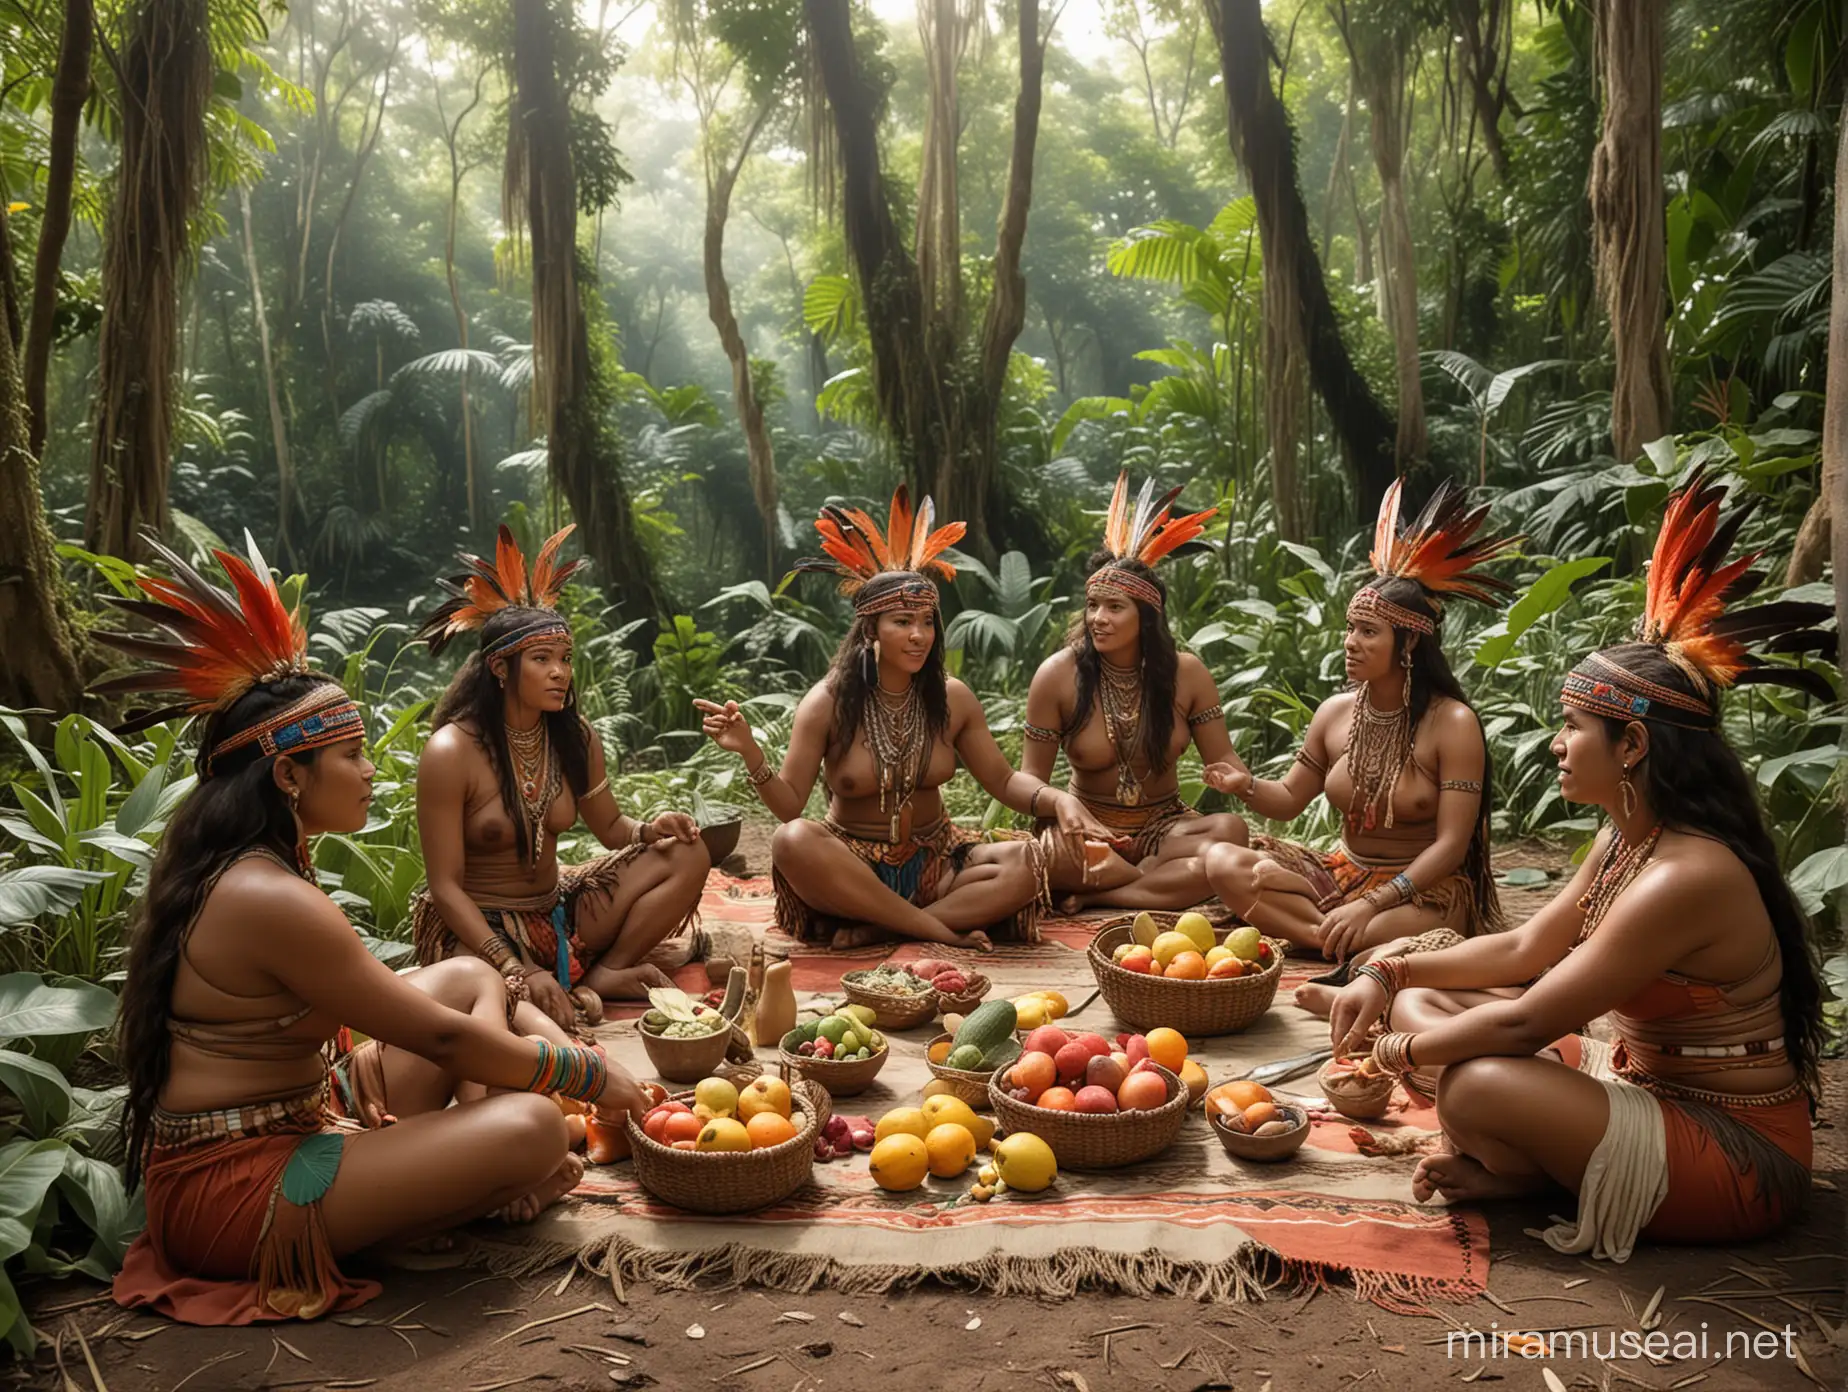 A scene depicting a group of warrior Amazon women picnicking in the rainforest. The women have different appearances, some with dark skin, others with light skin, wearing traditional warrior outfits, feather headdresses and beaded necklaces. They sit on a large colorful blanket surrounded by lush greenery, giant trees and exotic plants. On the blanket are various tropical fruits, wicker baskets and clay pots filled with food. The atmosphere is bright and serene, with sunlight streaming through the thick canopy overhead.